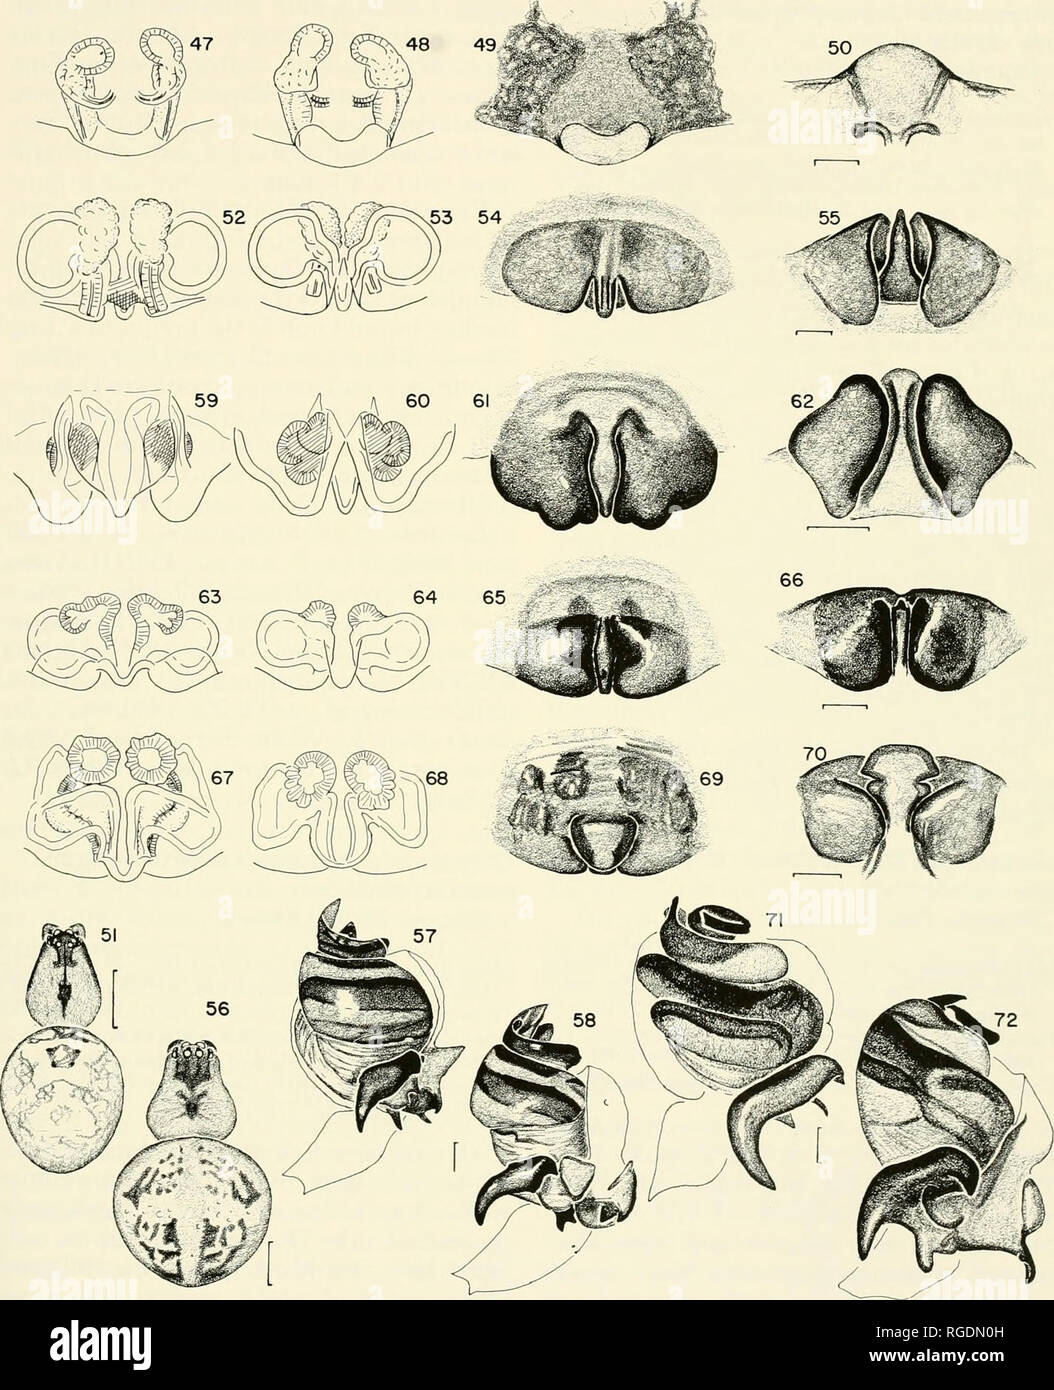 . Bulletin of the Museum of Comparative Zoology at Harvard College. Zoology. Chrysometa and Homalometa • Levi 123. Figures 63-66. C. malkinin. sp., epigynum. 63. Dorsal, cleared. 64. Ventral, cleared. 65. Ventral. 66. Posterior. Figures 67-70. C. sabana n. sp., epigynum. 67. Dorsal, cleared. 68. Ventral, cleared. 69. Ventral. 70. Posterior. Figures 71, 72. C. raripila (Keyserling), male palpus. 71. Ventral. 72. Lateral. Scale lines. 0.1 mm, except Figures 51, 56, 1.0 mm.. Please note that these images are extracted from scanned page images that may have been digitally enhanced for readability  Stock Photo